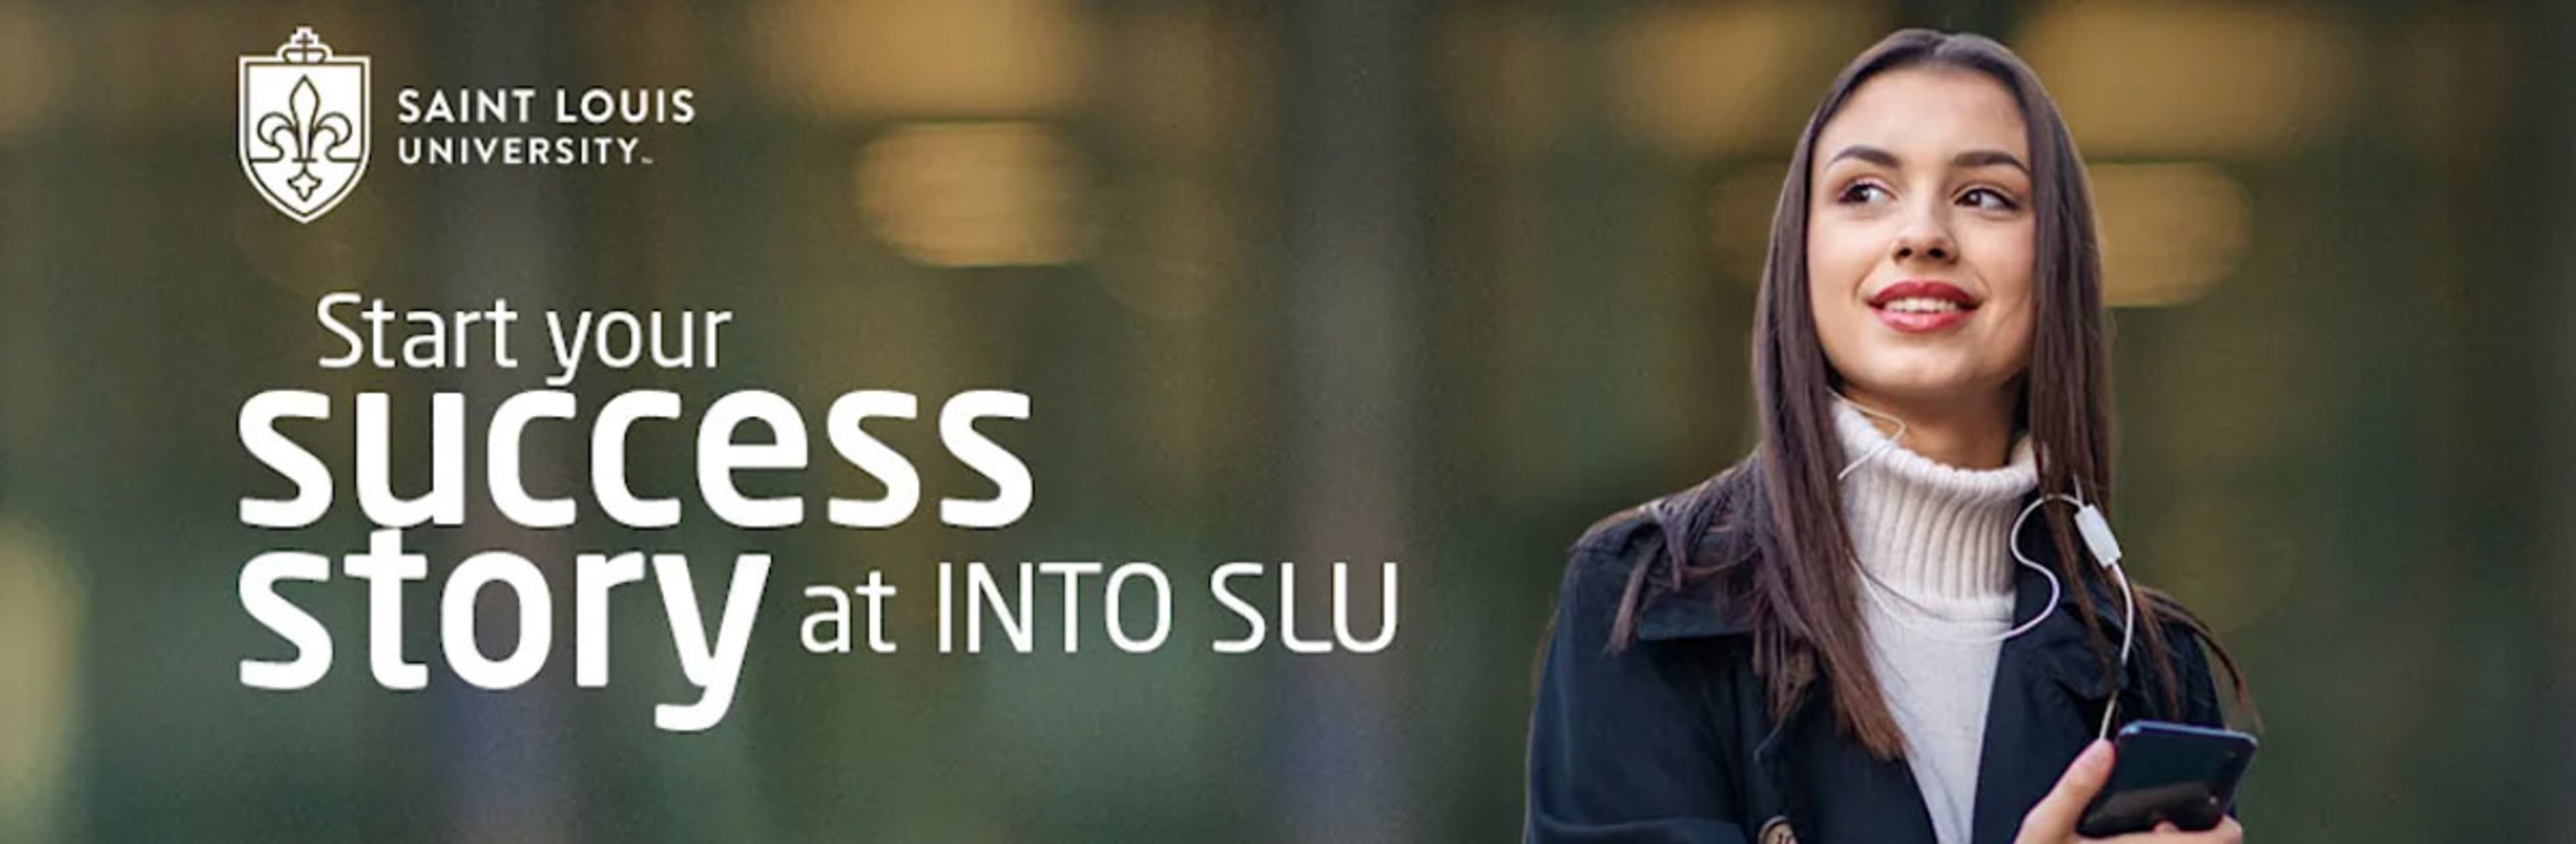 Start your Success story at INTO SLU student looking at sign